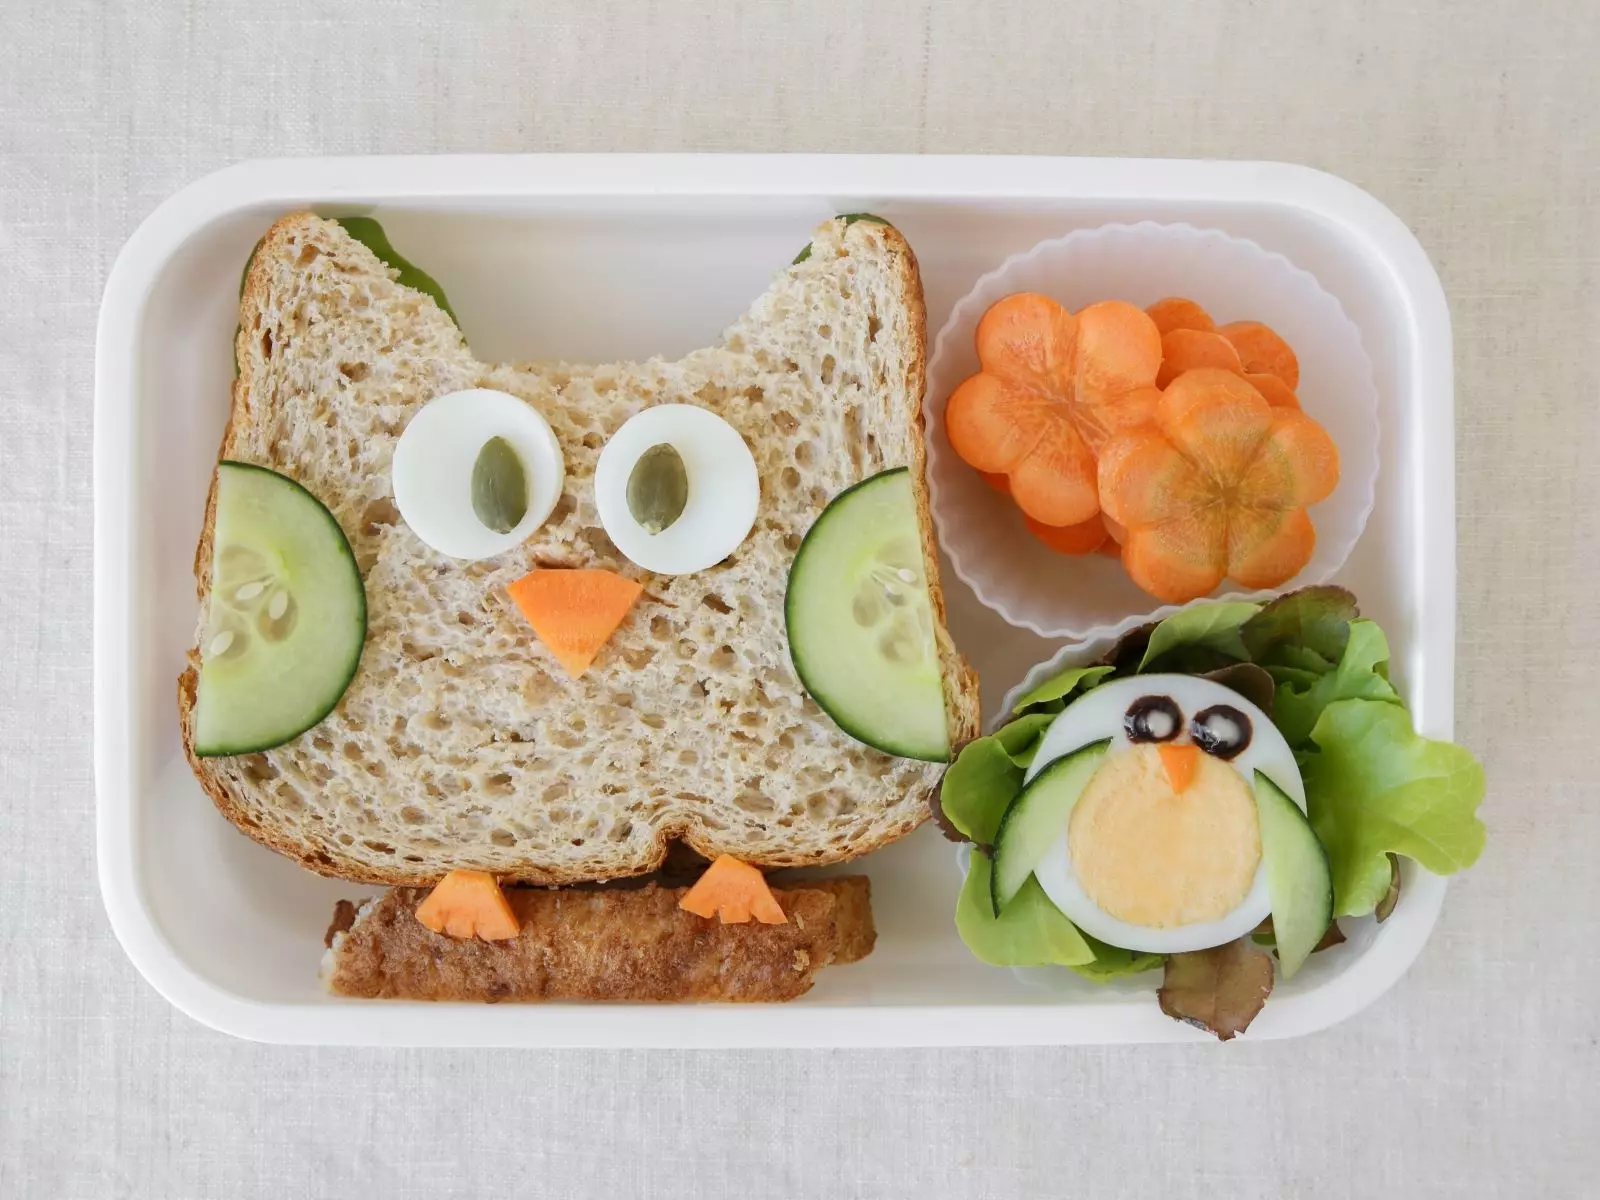 Packing Lunch Boxes The Easy Way!